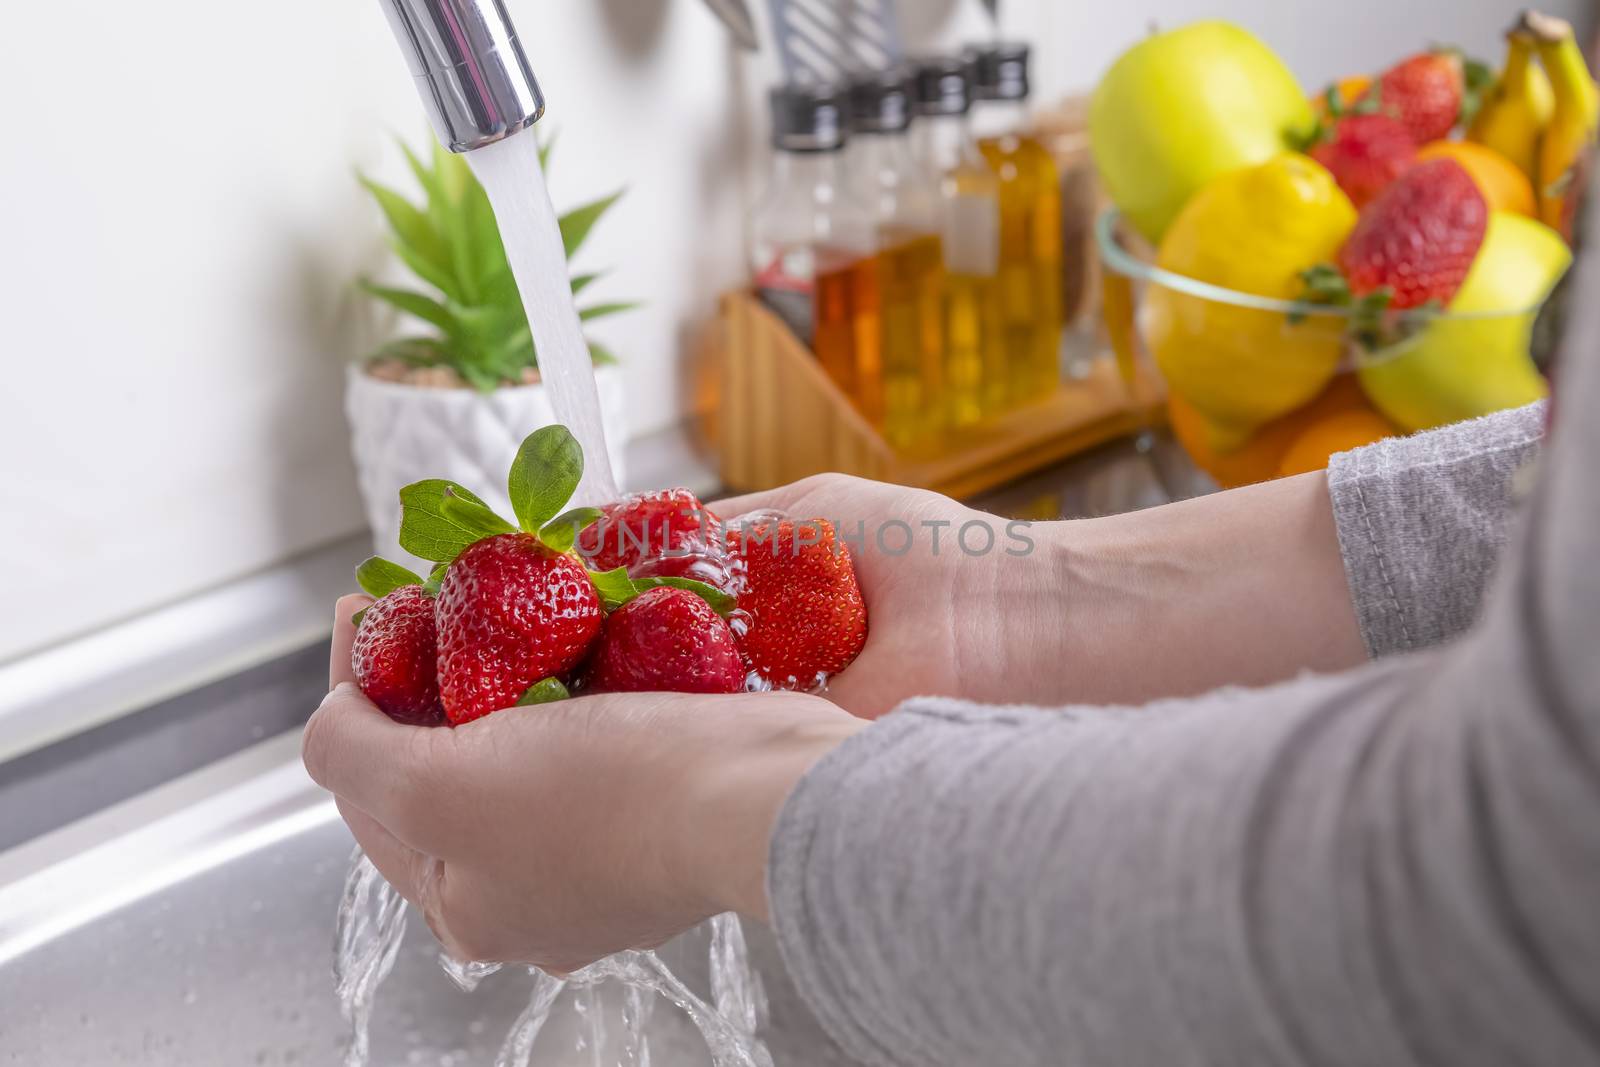 Woman washing strawberries in the kitchen by manaemedia